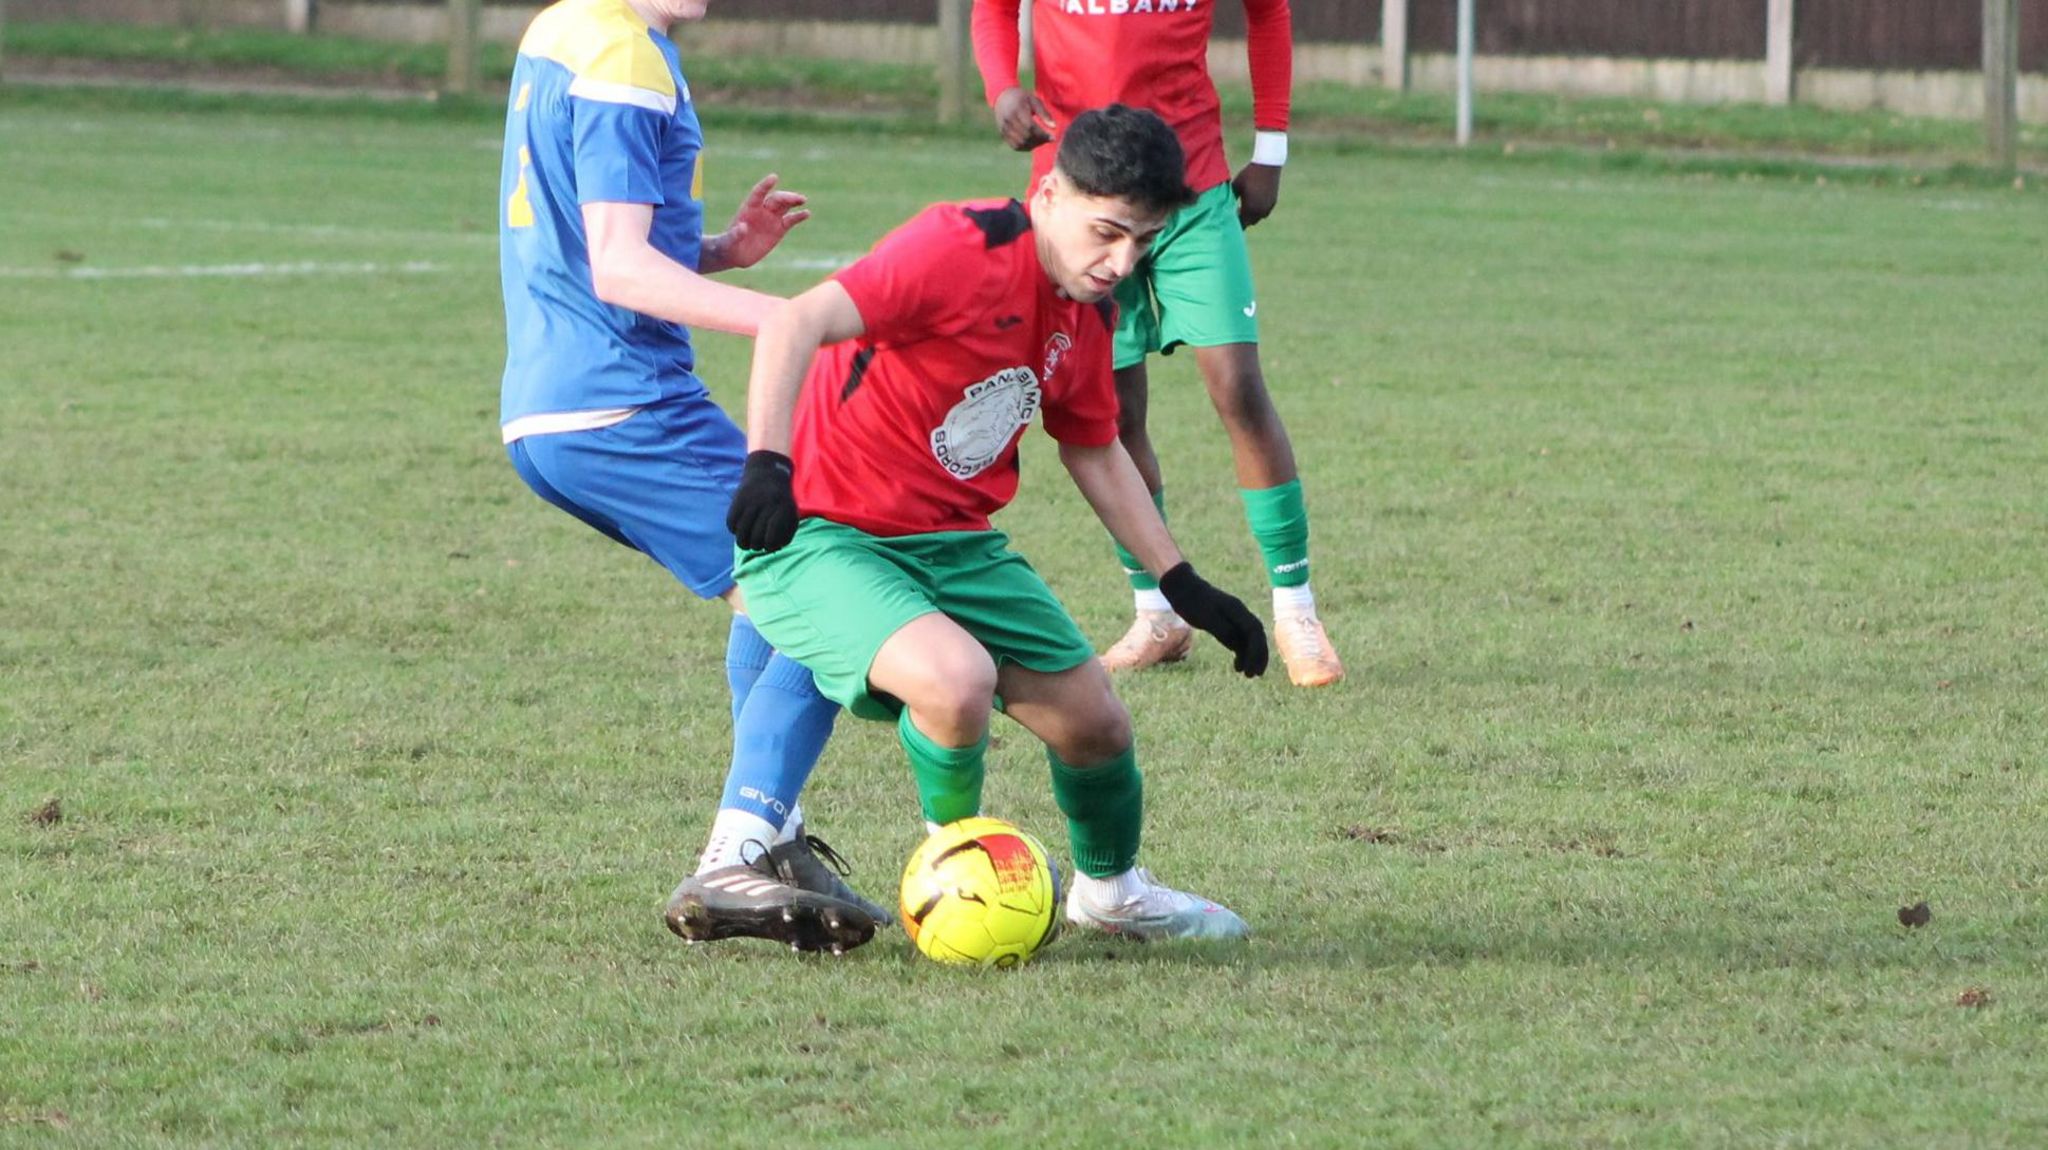 A youth footballer in a game